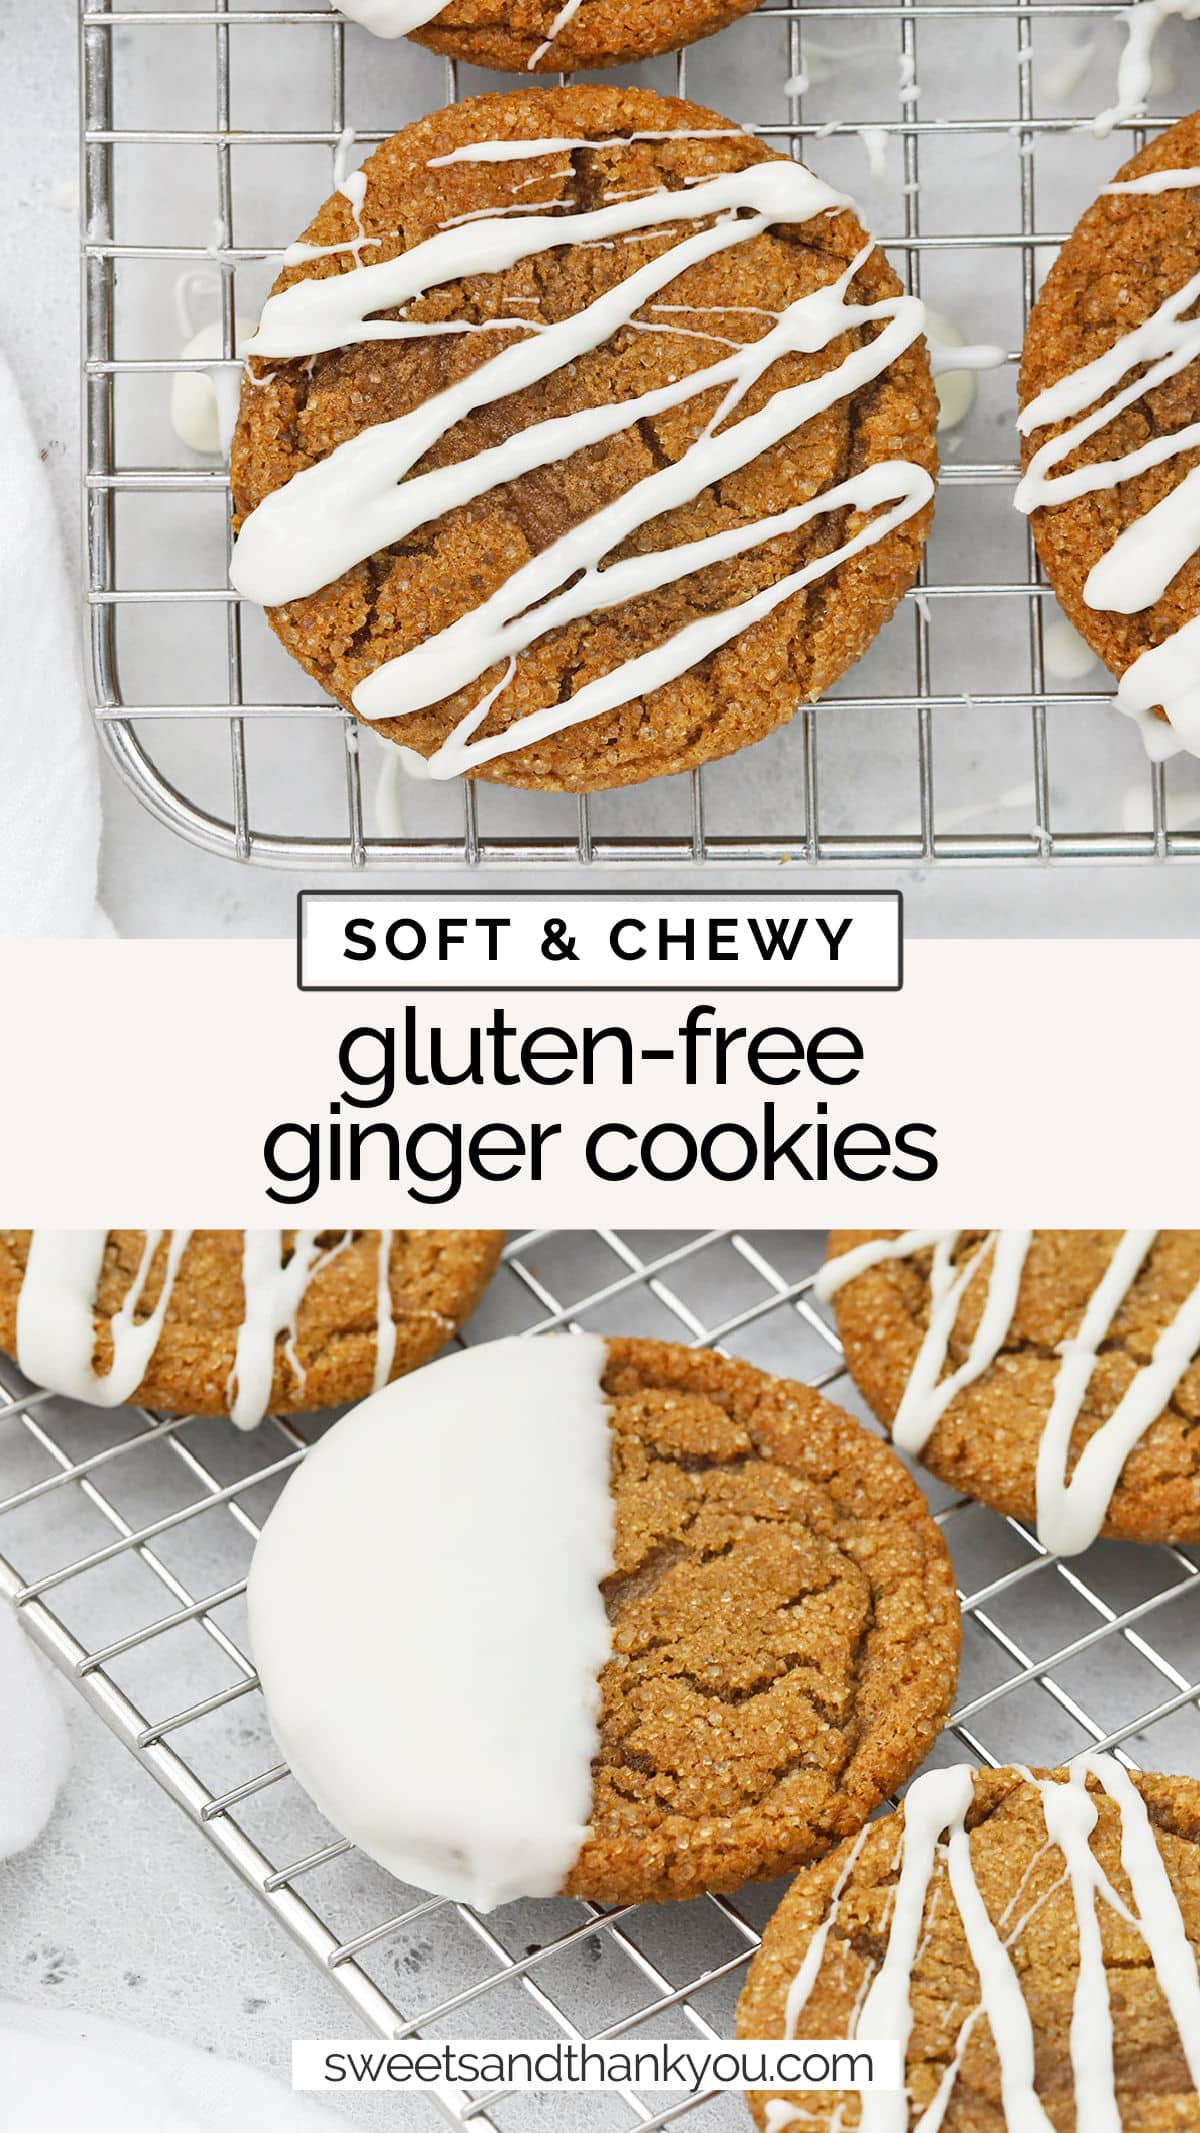 Soft & Chewy Gluten-Free Ginger Cookies - These gorgeous soft ginger cookies taste even better than they look. Try them drizzled or dipped in white chocolate for an extra pretty finish! // gluten free ginger cookies // chewy ginger cookies // soft ginger cookies // holiday ginger cookies // dipped ginger cookies // easy ginger cookies // gluten free holiday cookies // gluten-free holiday cookie plate / gluten-free christmas cookies / gluten-free cookie exchange recipe